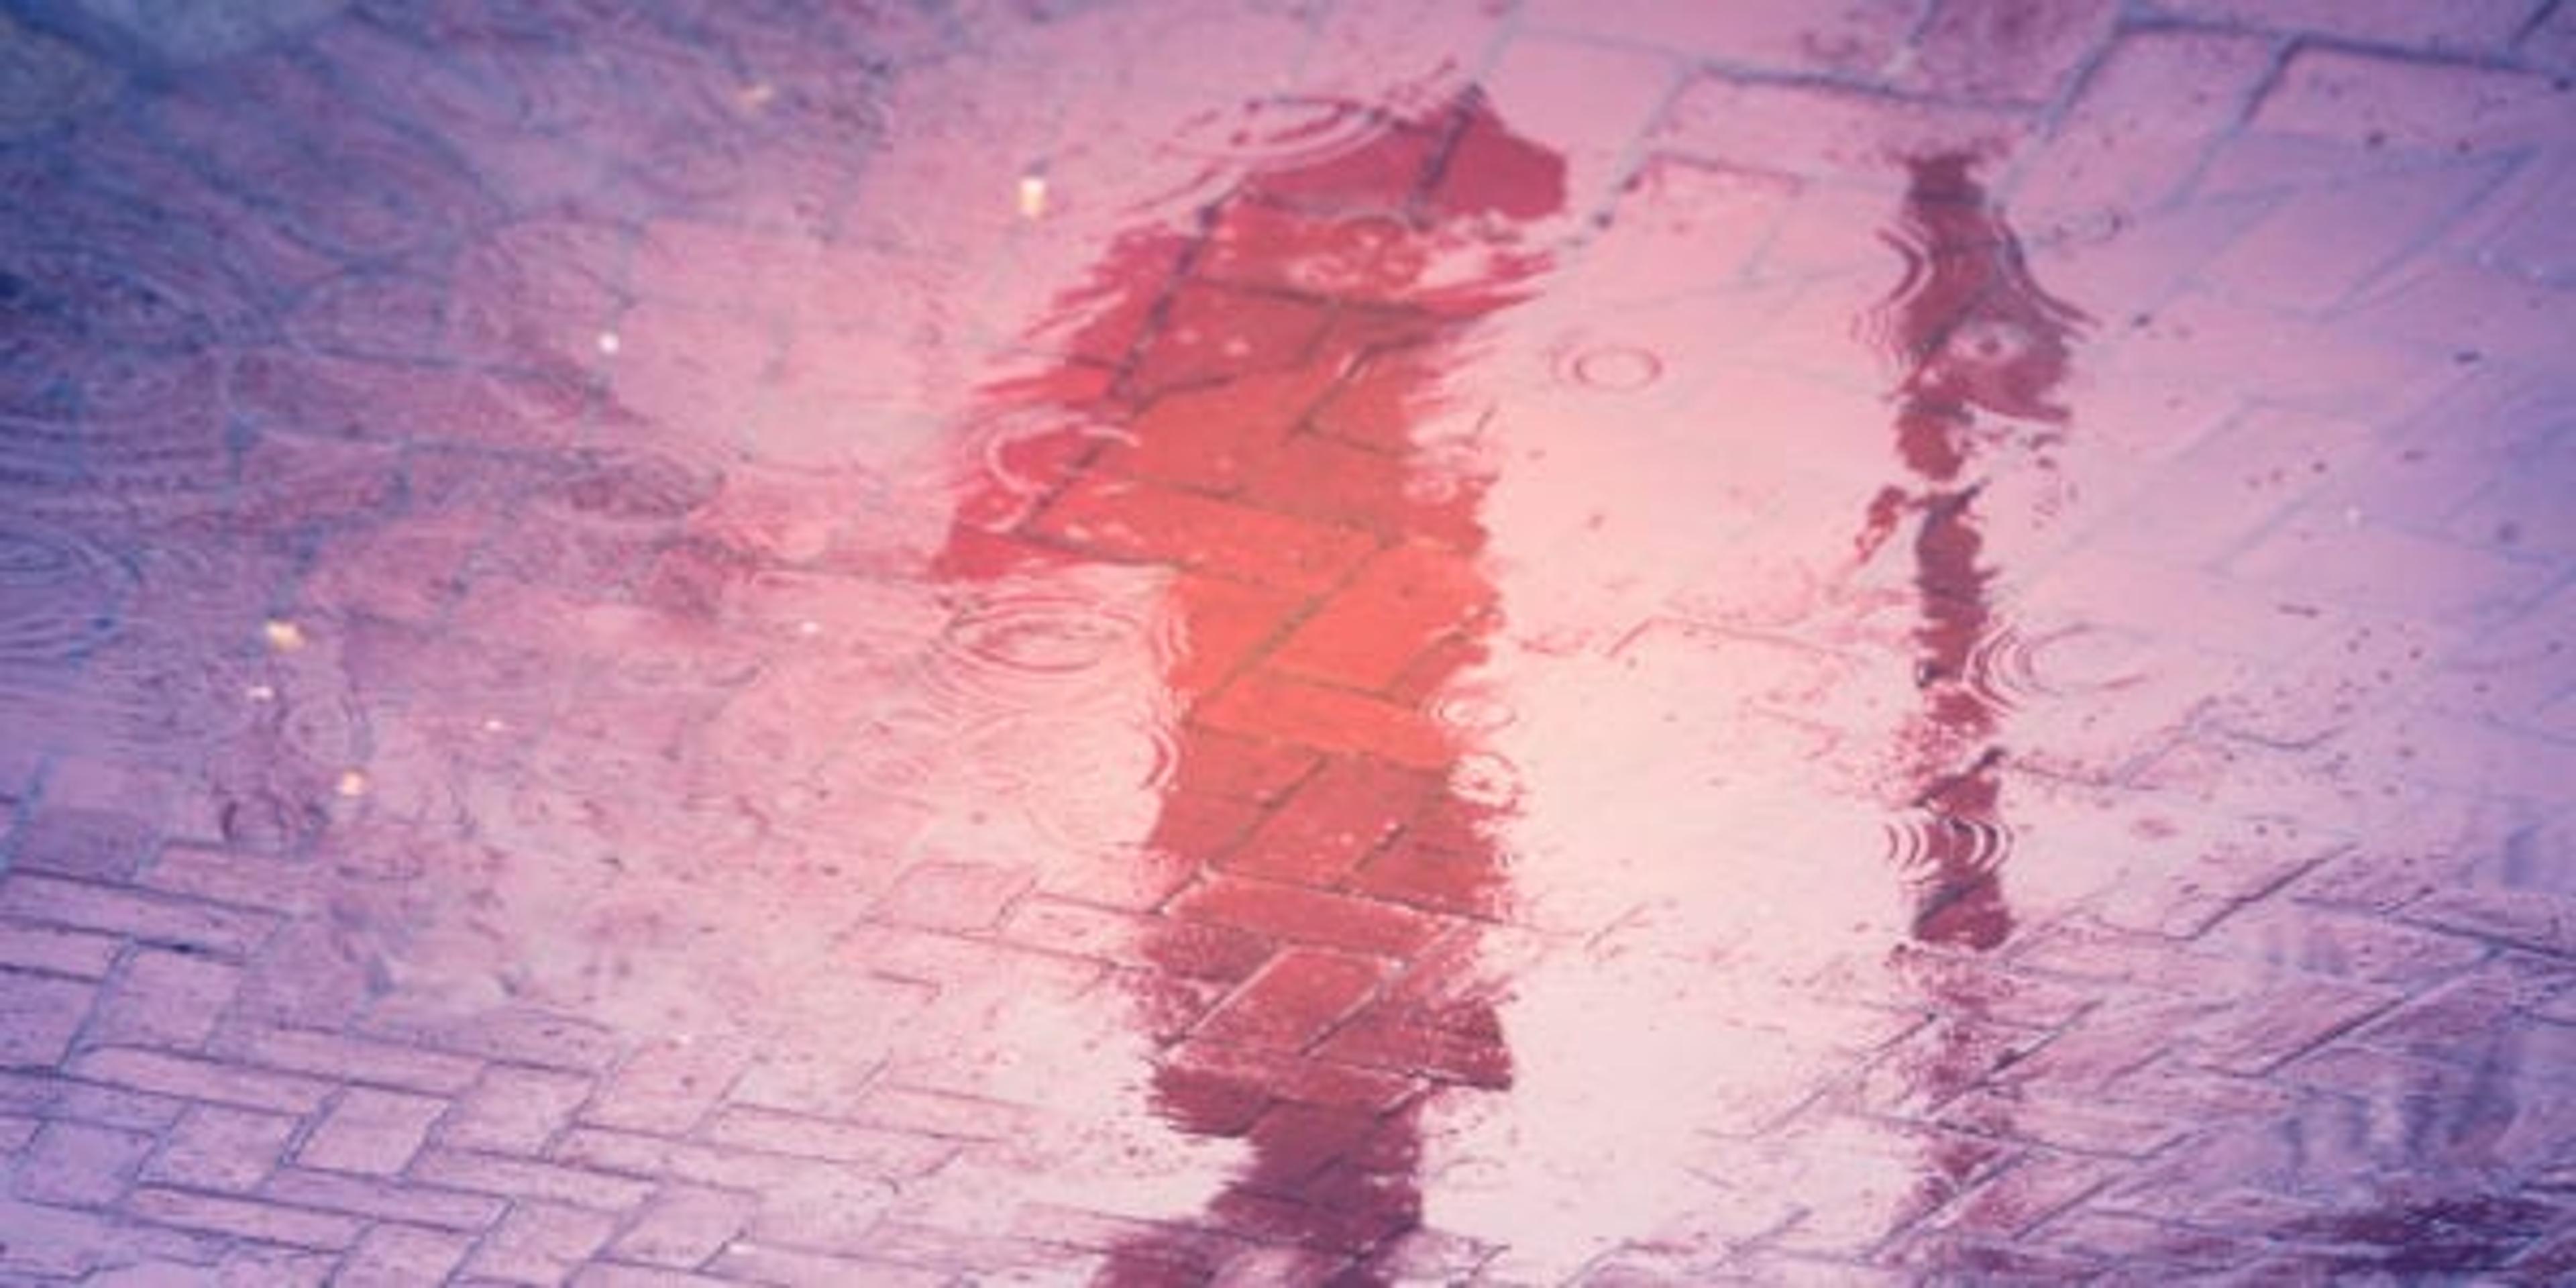 Image of woman holding an umbrella reflected in a puddle.